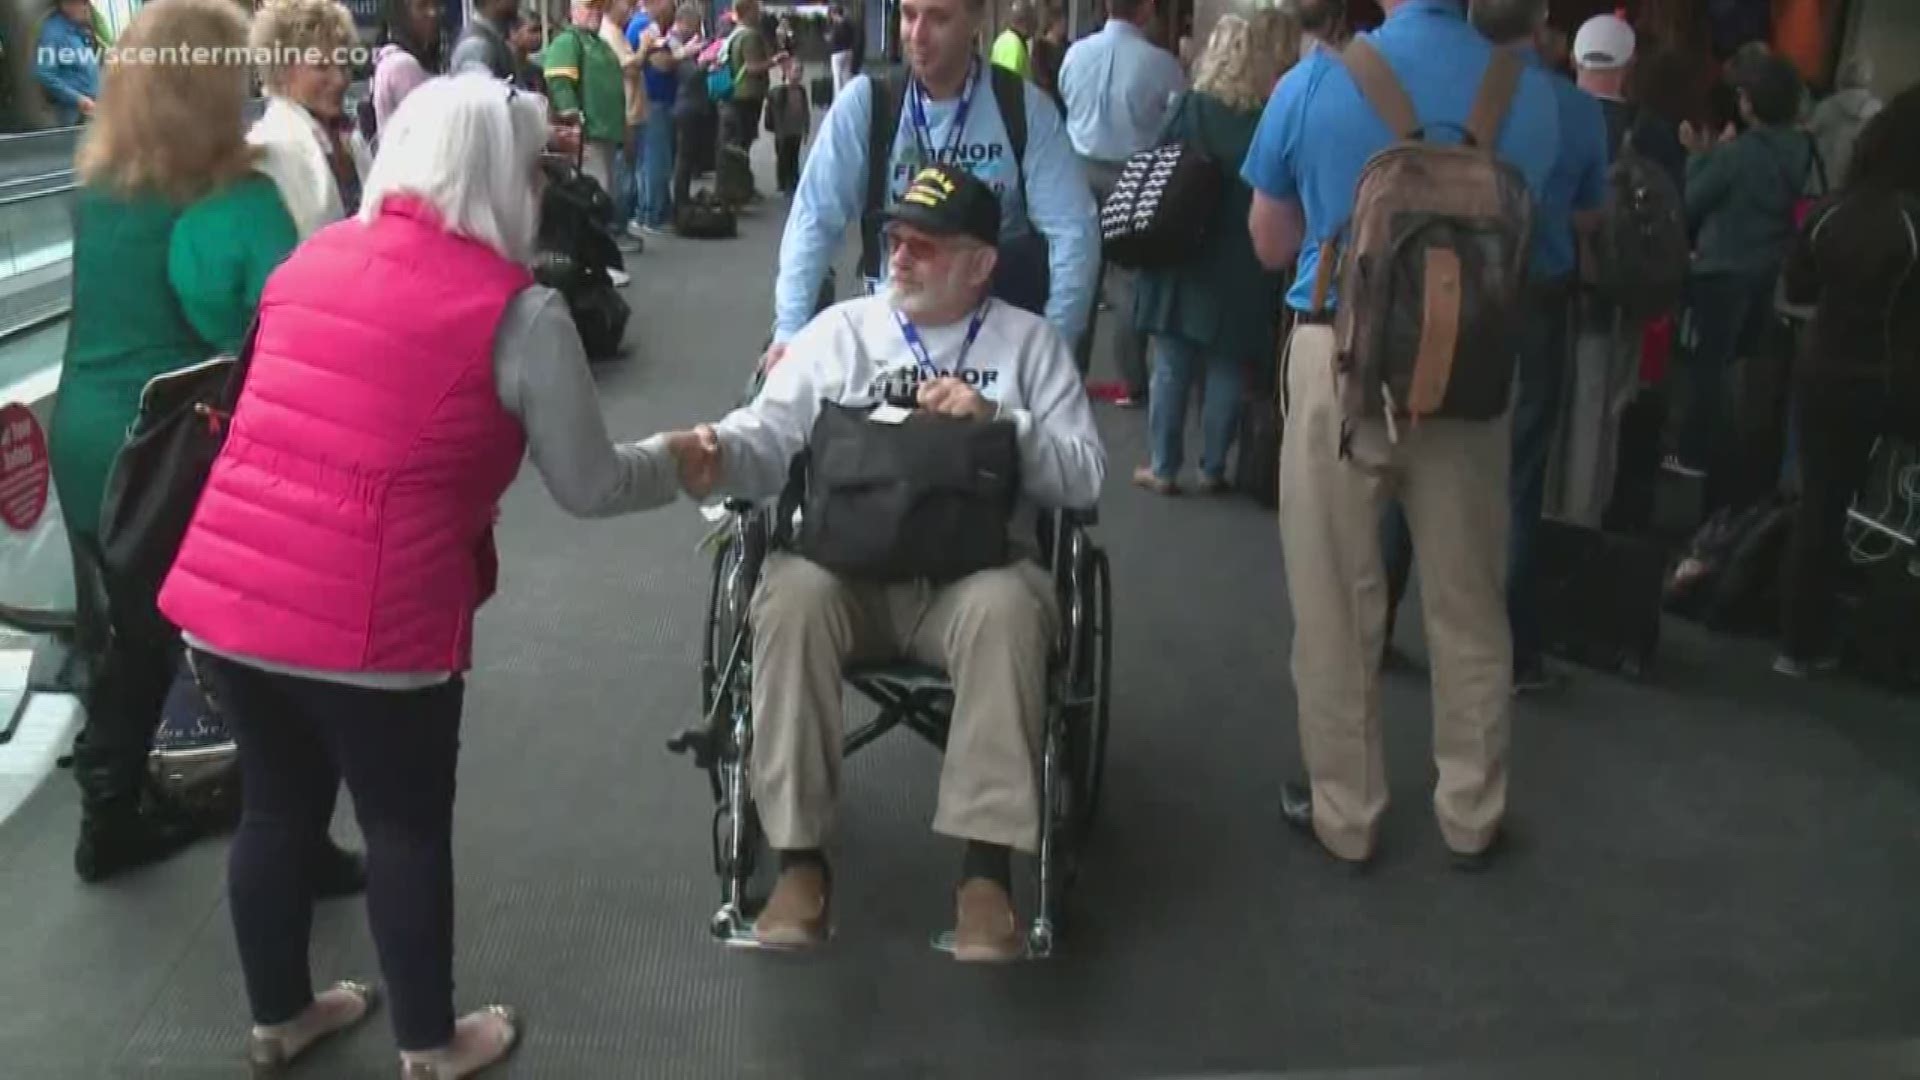 Honor flight veterans on their way to D.C. get a warm welcome in Baltimore.